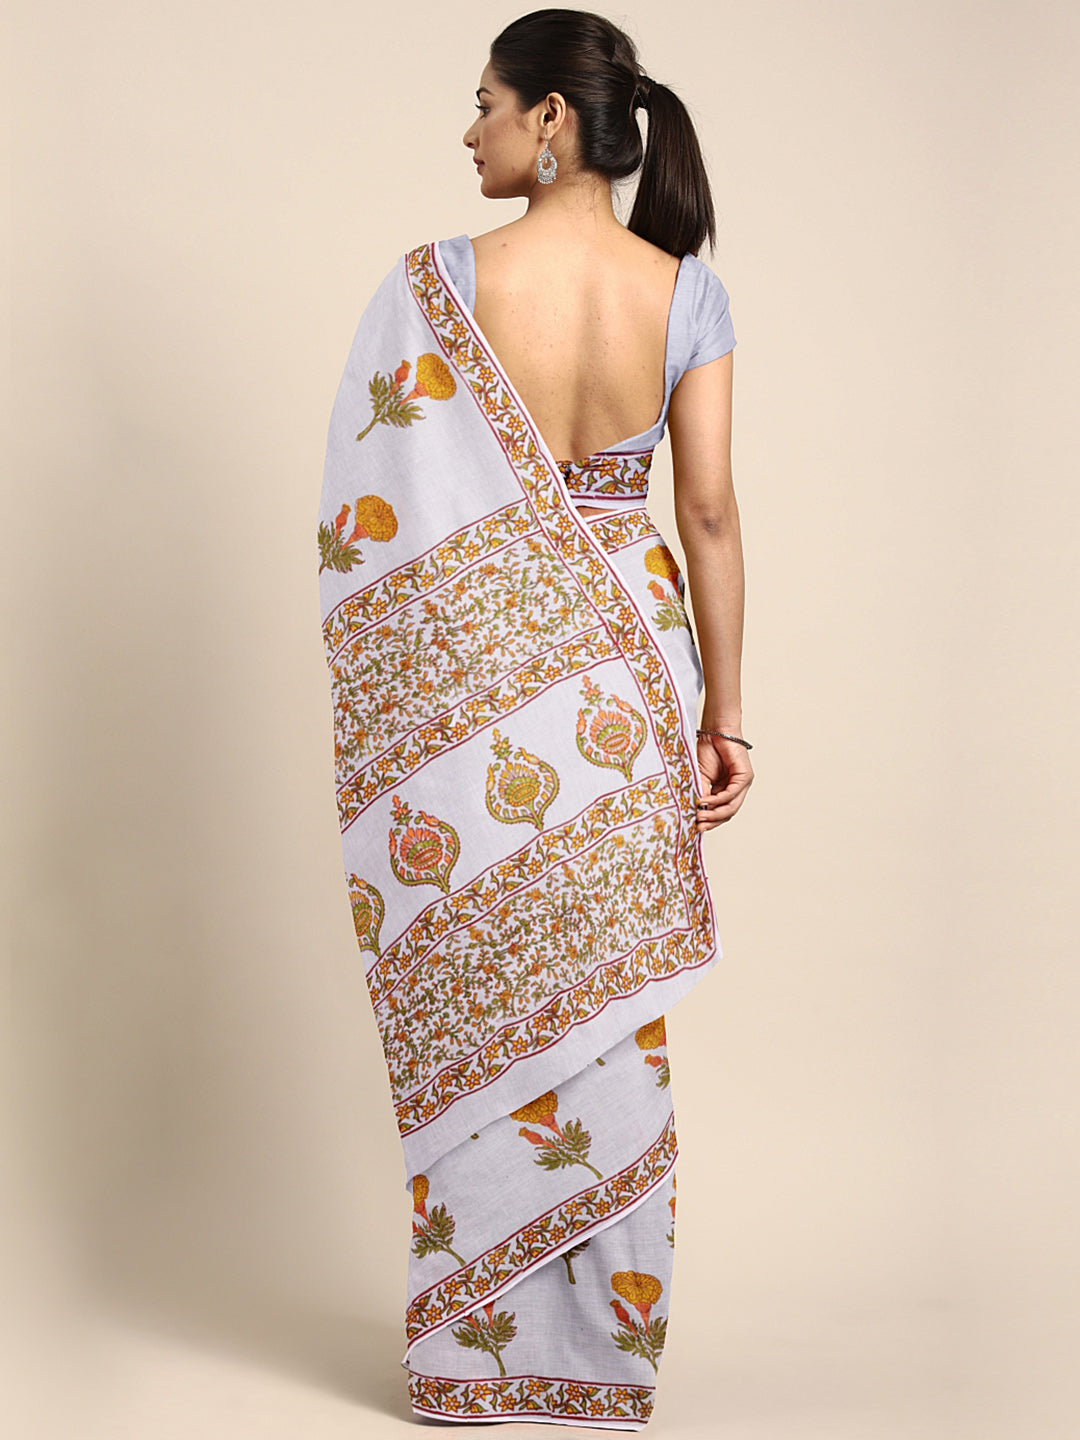 Off-White & Mustard Yellow Hand Block Print Handcrafted Cotton Saree-Saree-Kalakari India-BAPASA0085-Cotton, Dabu, Geographical Indication, Hand Blocks, Hand Crafted, Heritage Prints, Sarees, Sustainable Fabrics-[Linen,Ethnic,wear,Fashionista,Handloom,Handicraft,Indigo,blockprint,block,print,Cotton,Chanderi,Blue, latest,classy,party,bollywood,trendy,summer,style,traditional,formal,elegant,unique,style,hand,block,print, dabu,booti,gift,present,glamorous,affordable,collectible,Sari,Saree,printed, 